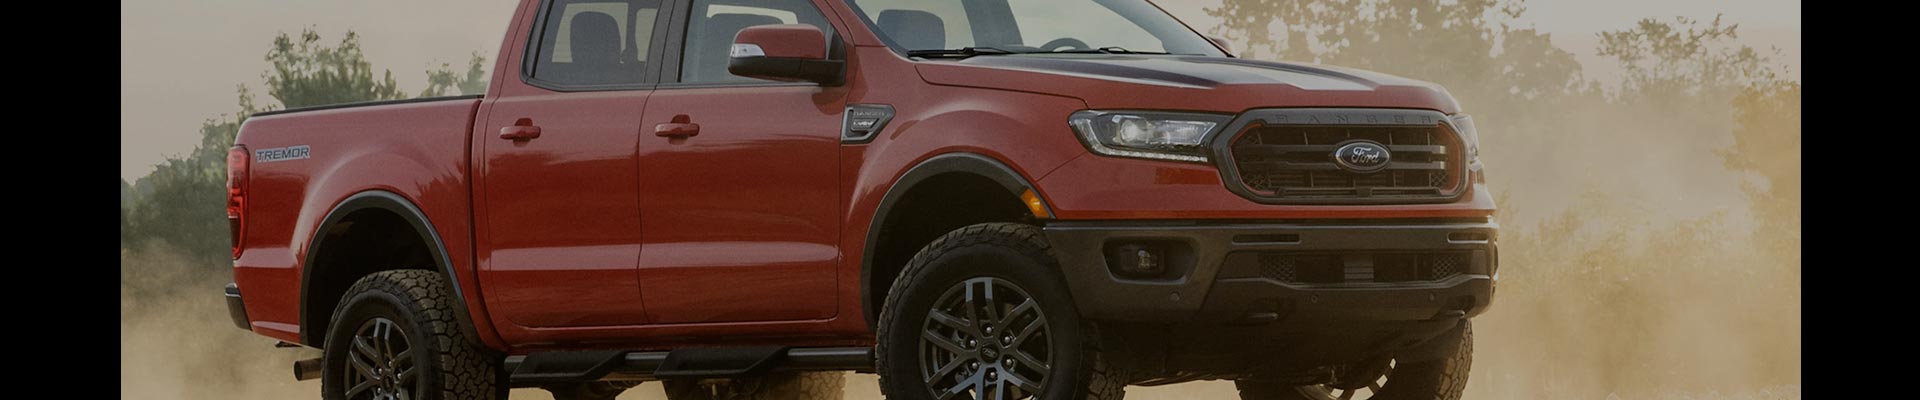 Shop Replacement and OEM 2019 Ford Ranger Parts with Discounted Price on the Net